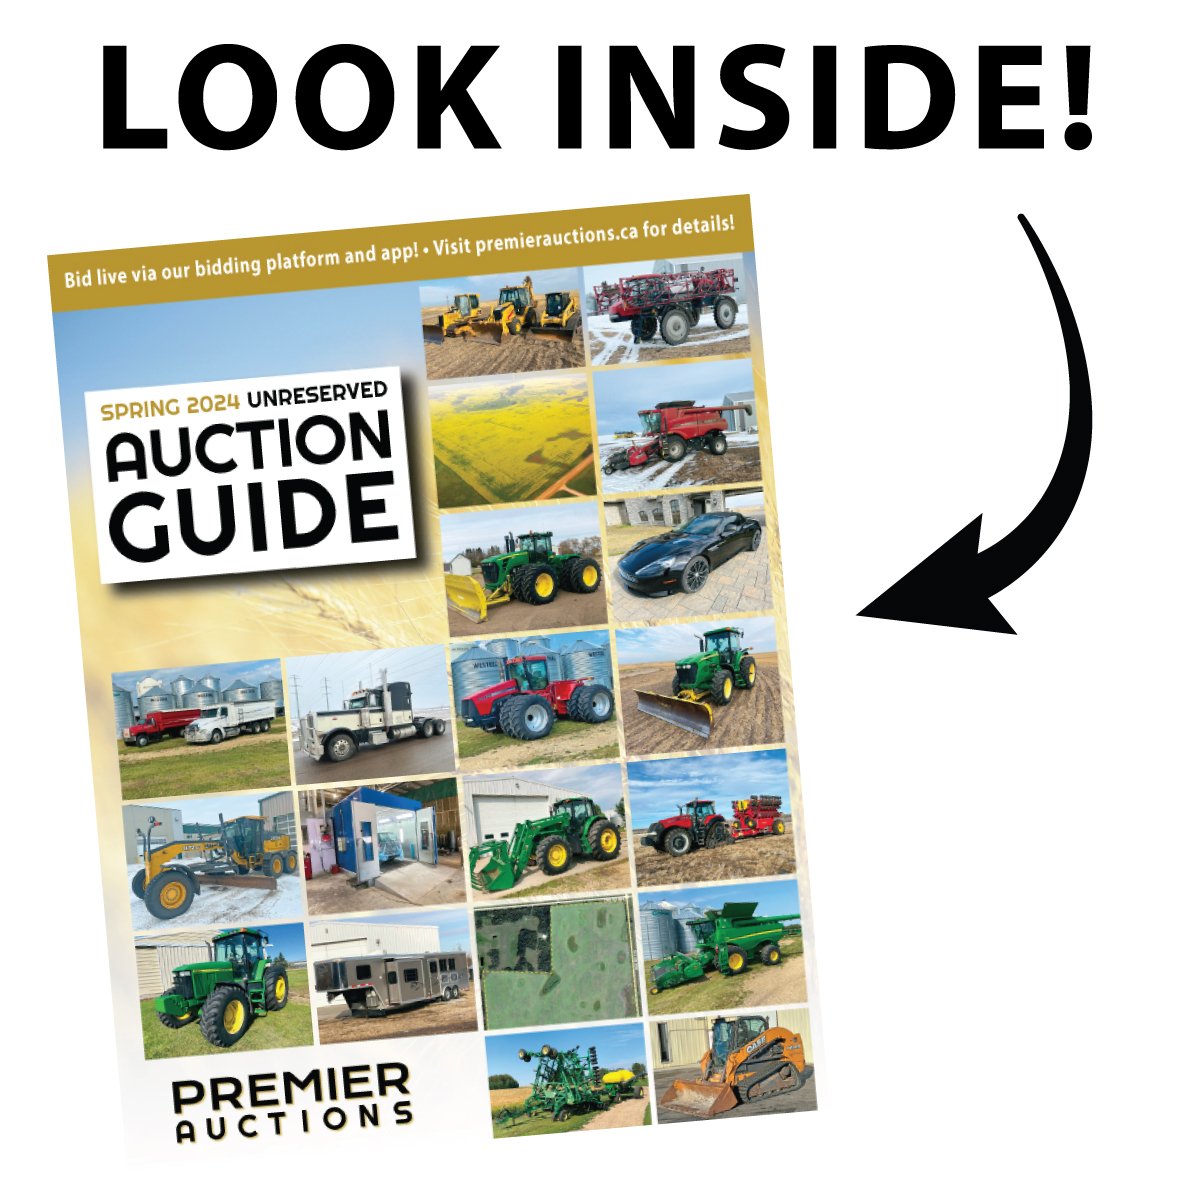 Spring 2024 Auction Guide